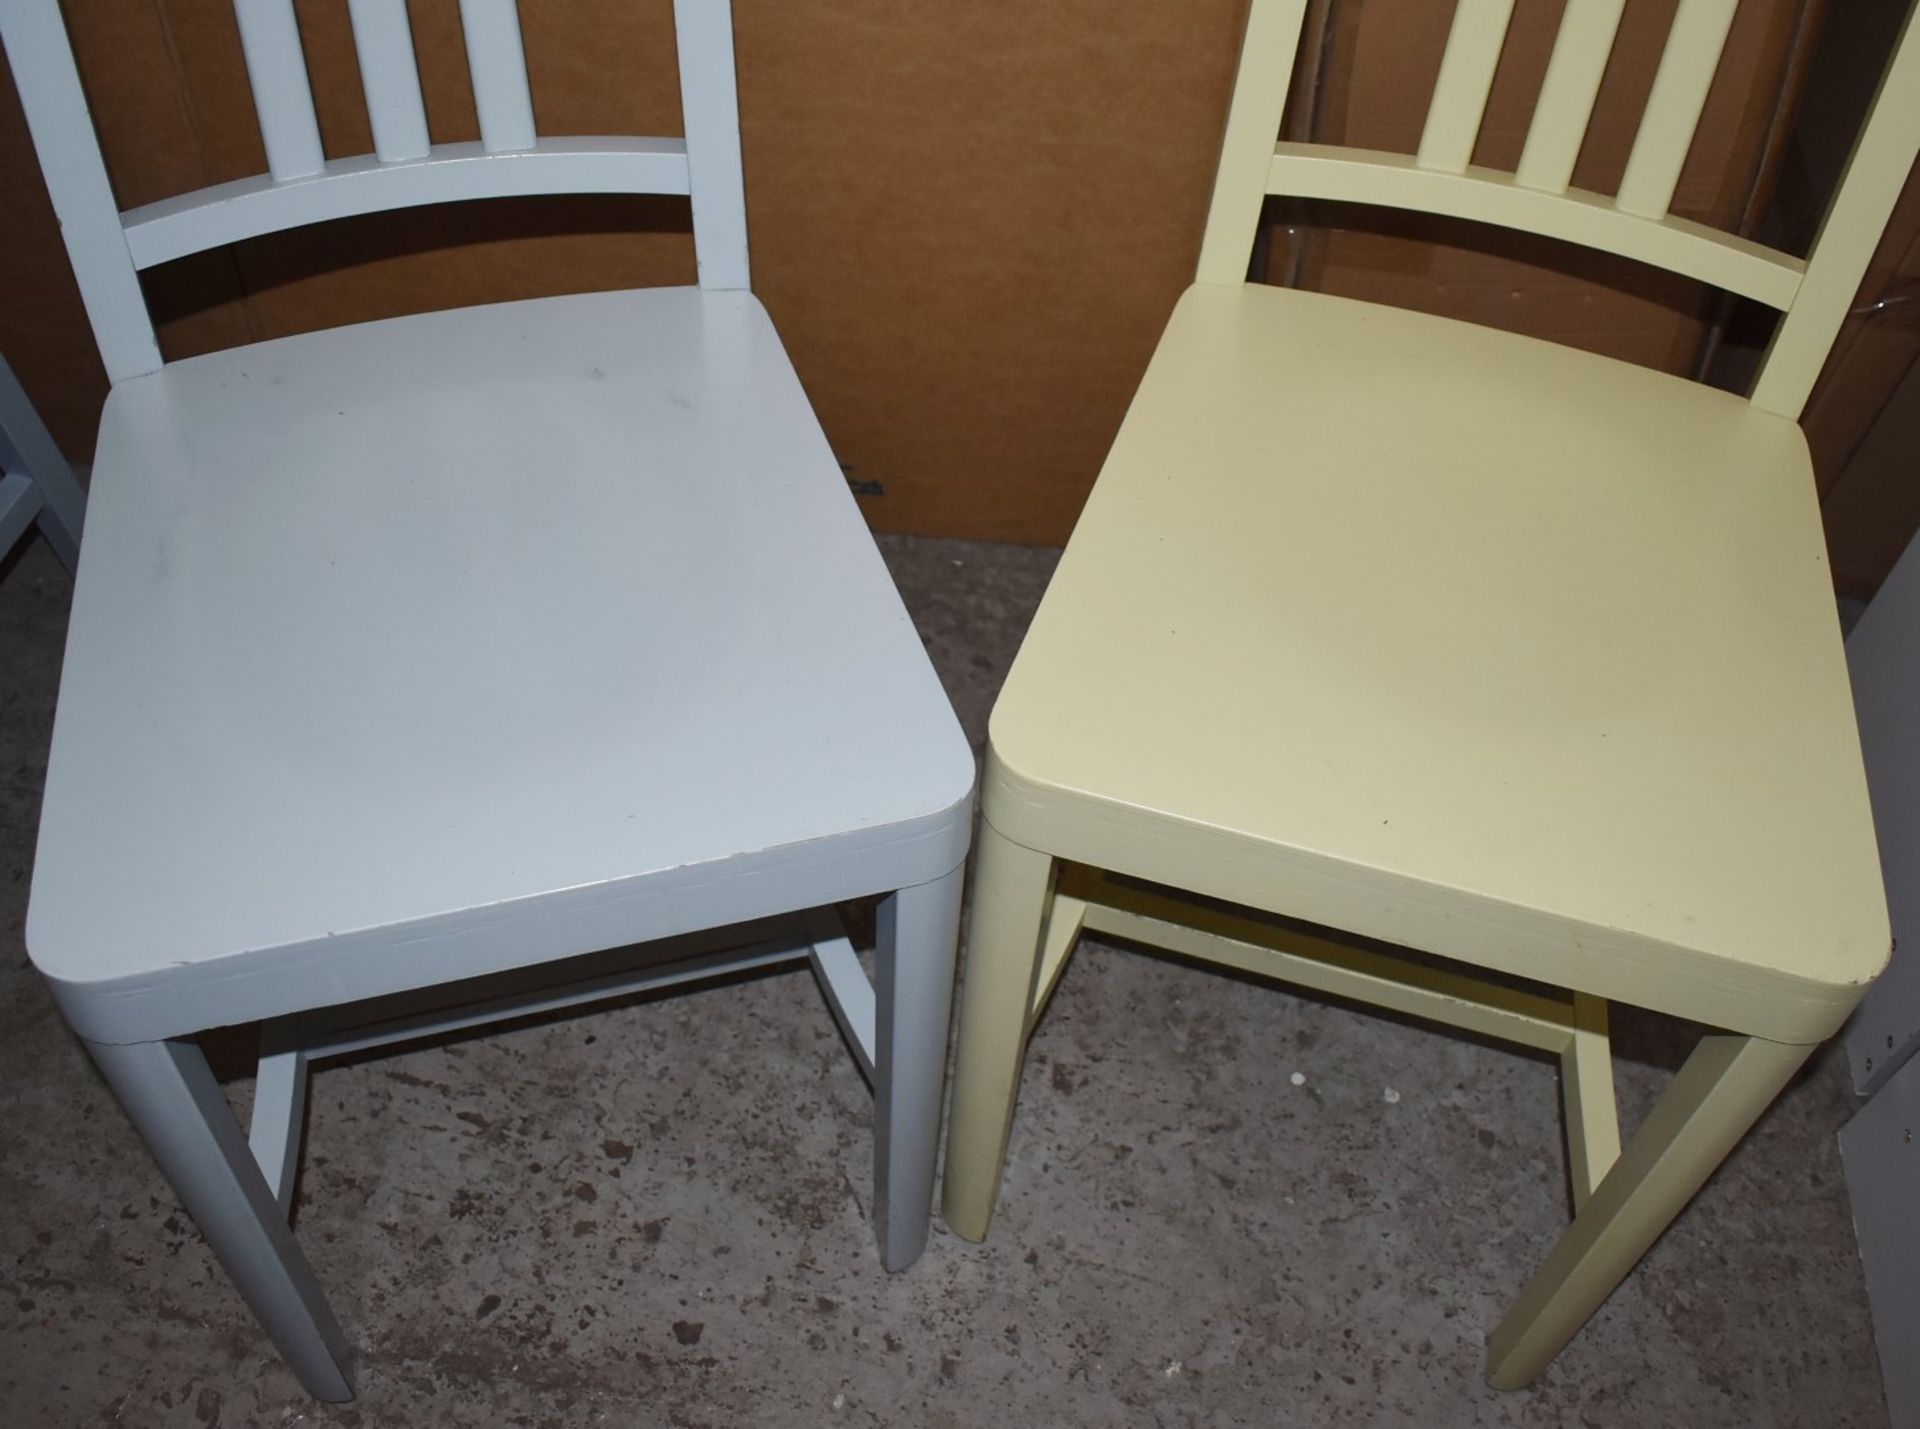 4 x Designer Billiani CO2 Contemporary Wooden Dining Chairs - Designed By Aldo Cibic - Made in Italy - Image 5 of 8